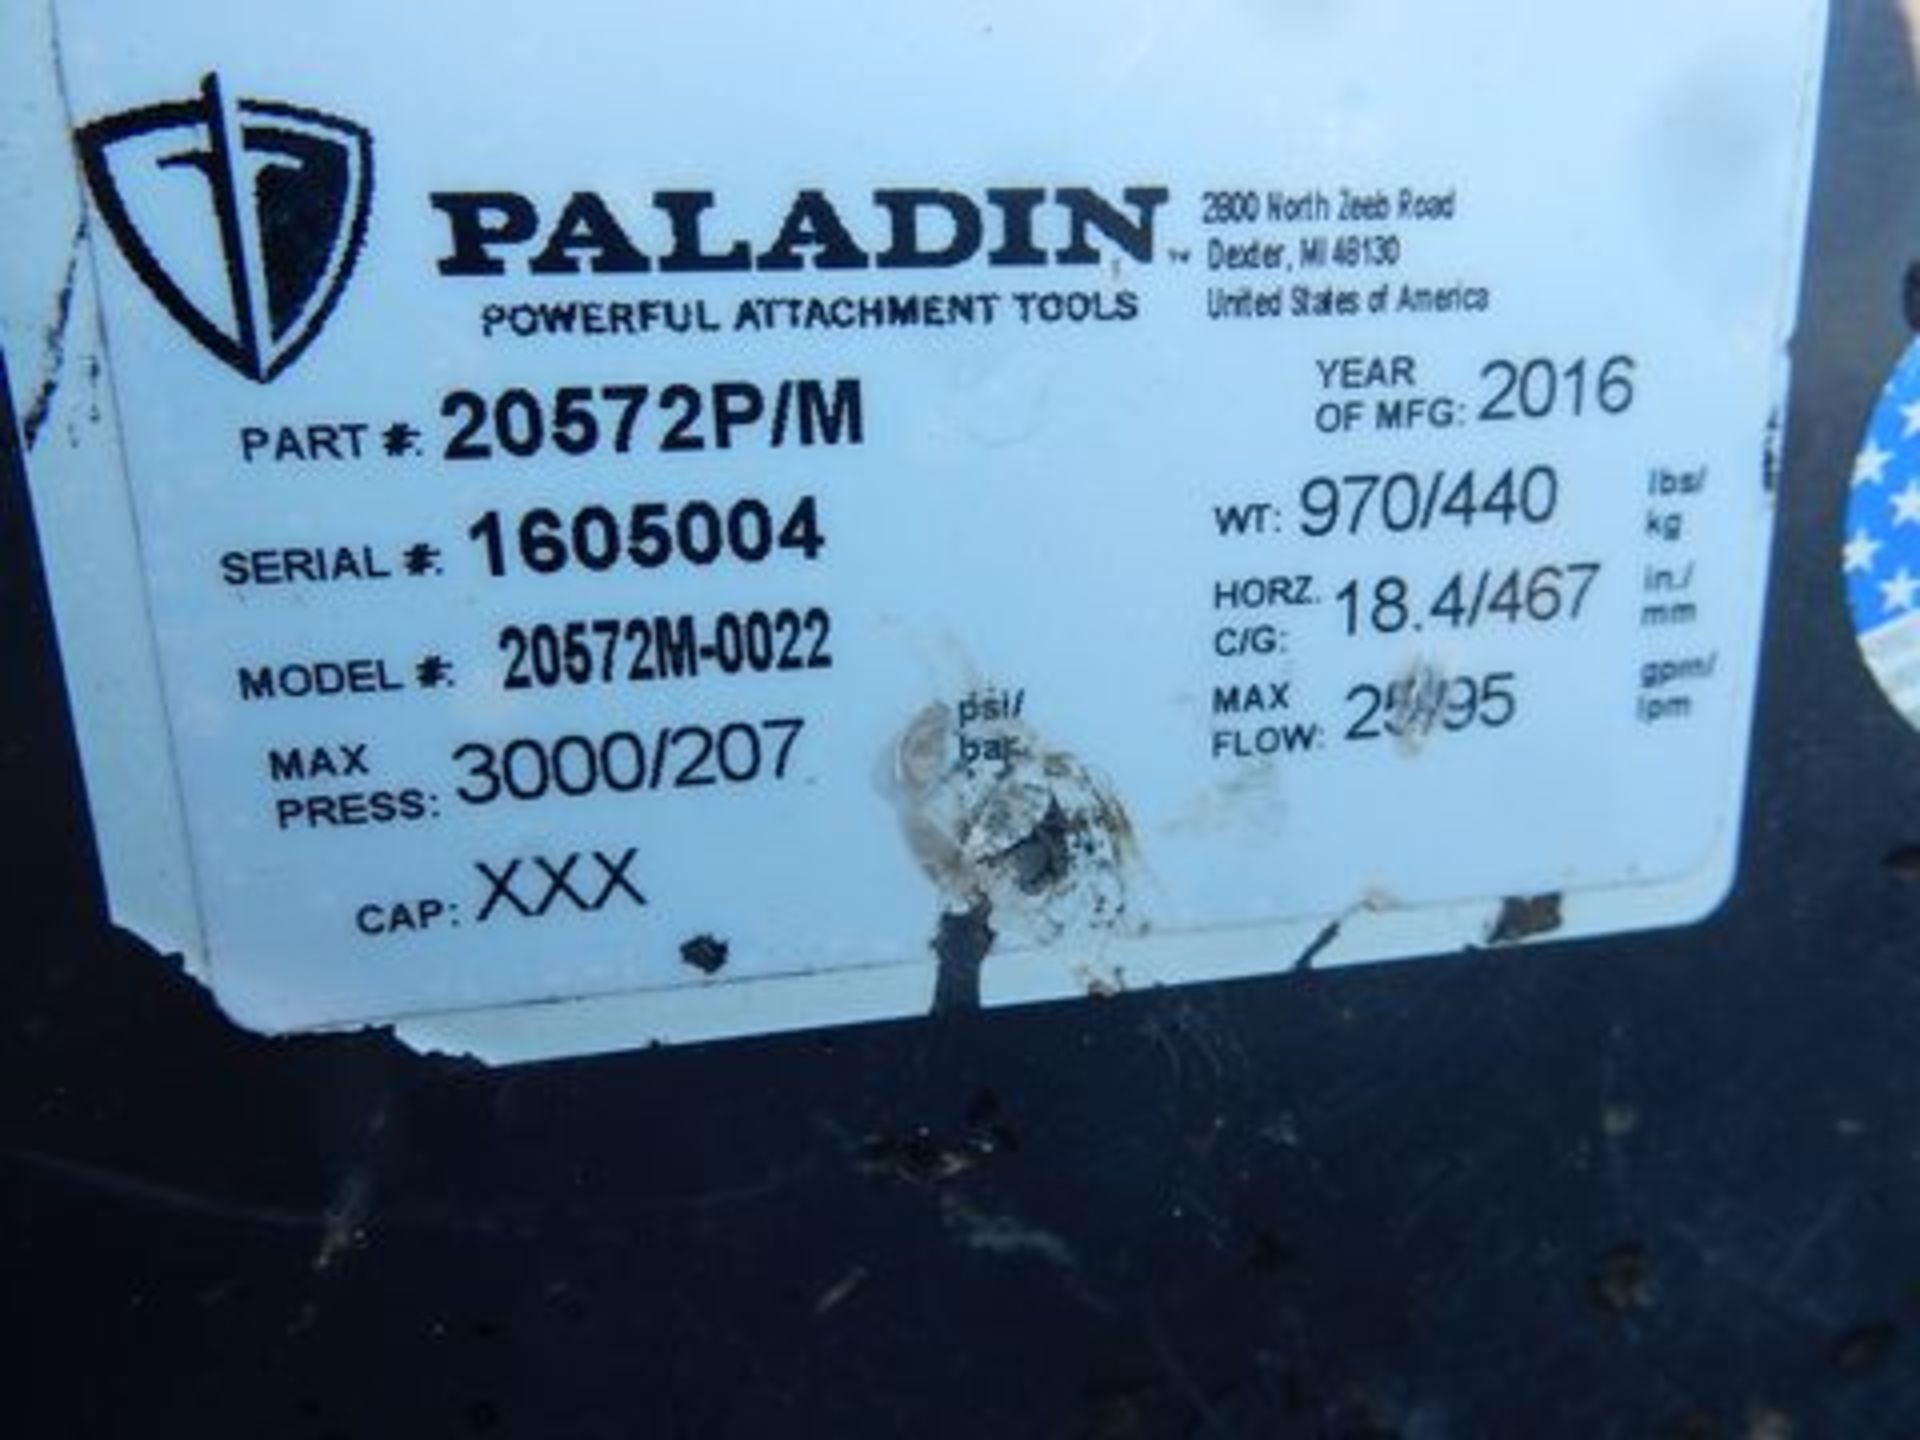 2016 PALADIN SKID STEER SWEEPER ATTACH., M# 20572M-0022, S/N 1605004 - Image 3 of 3